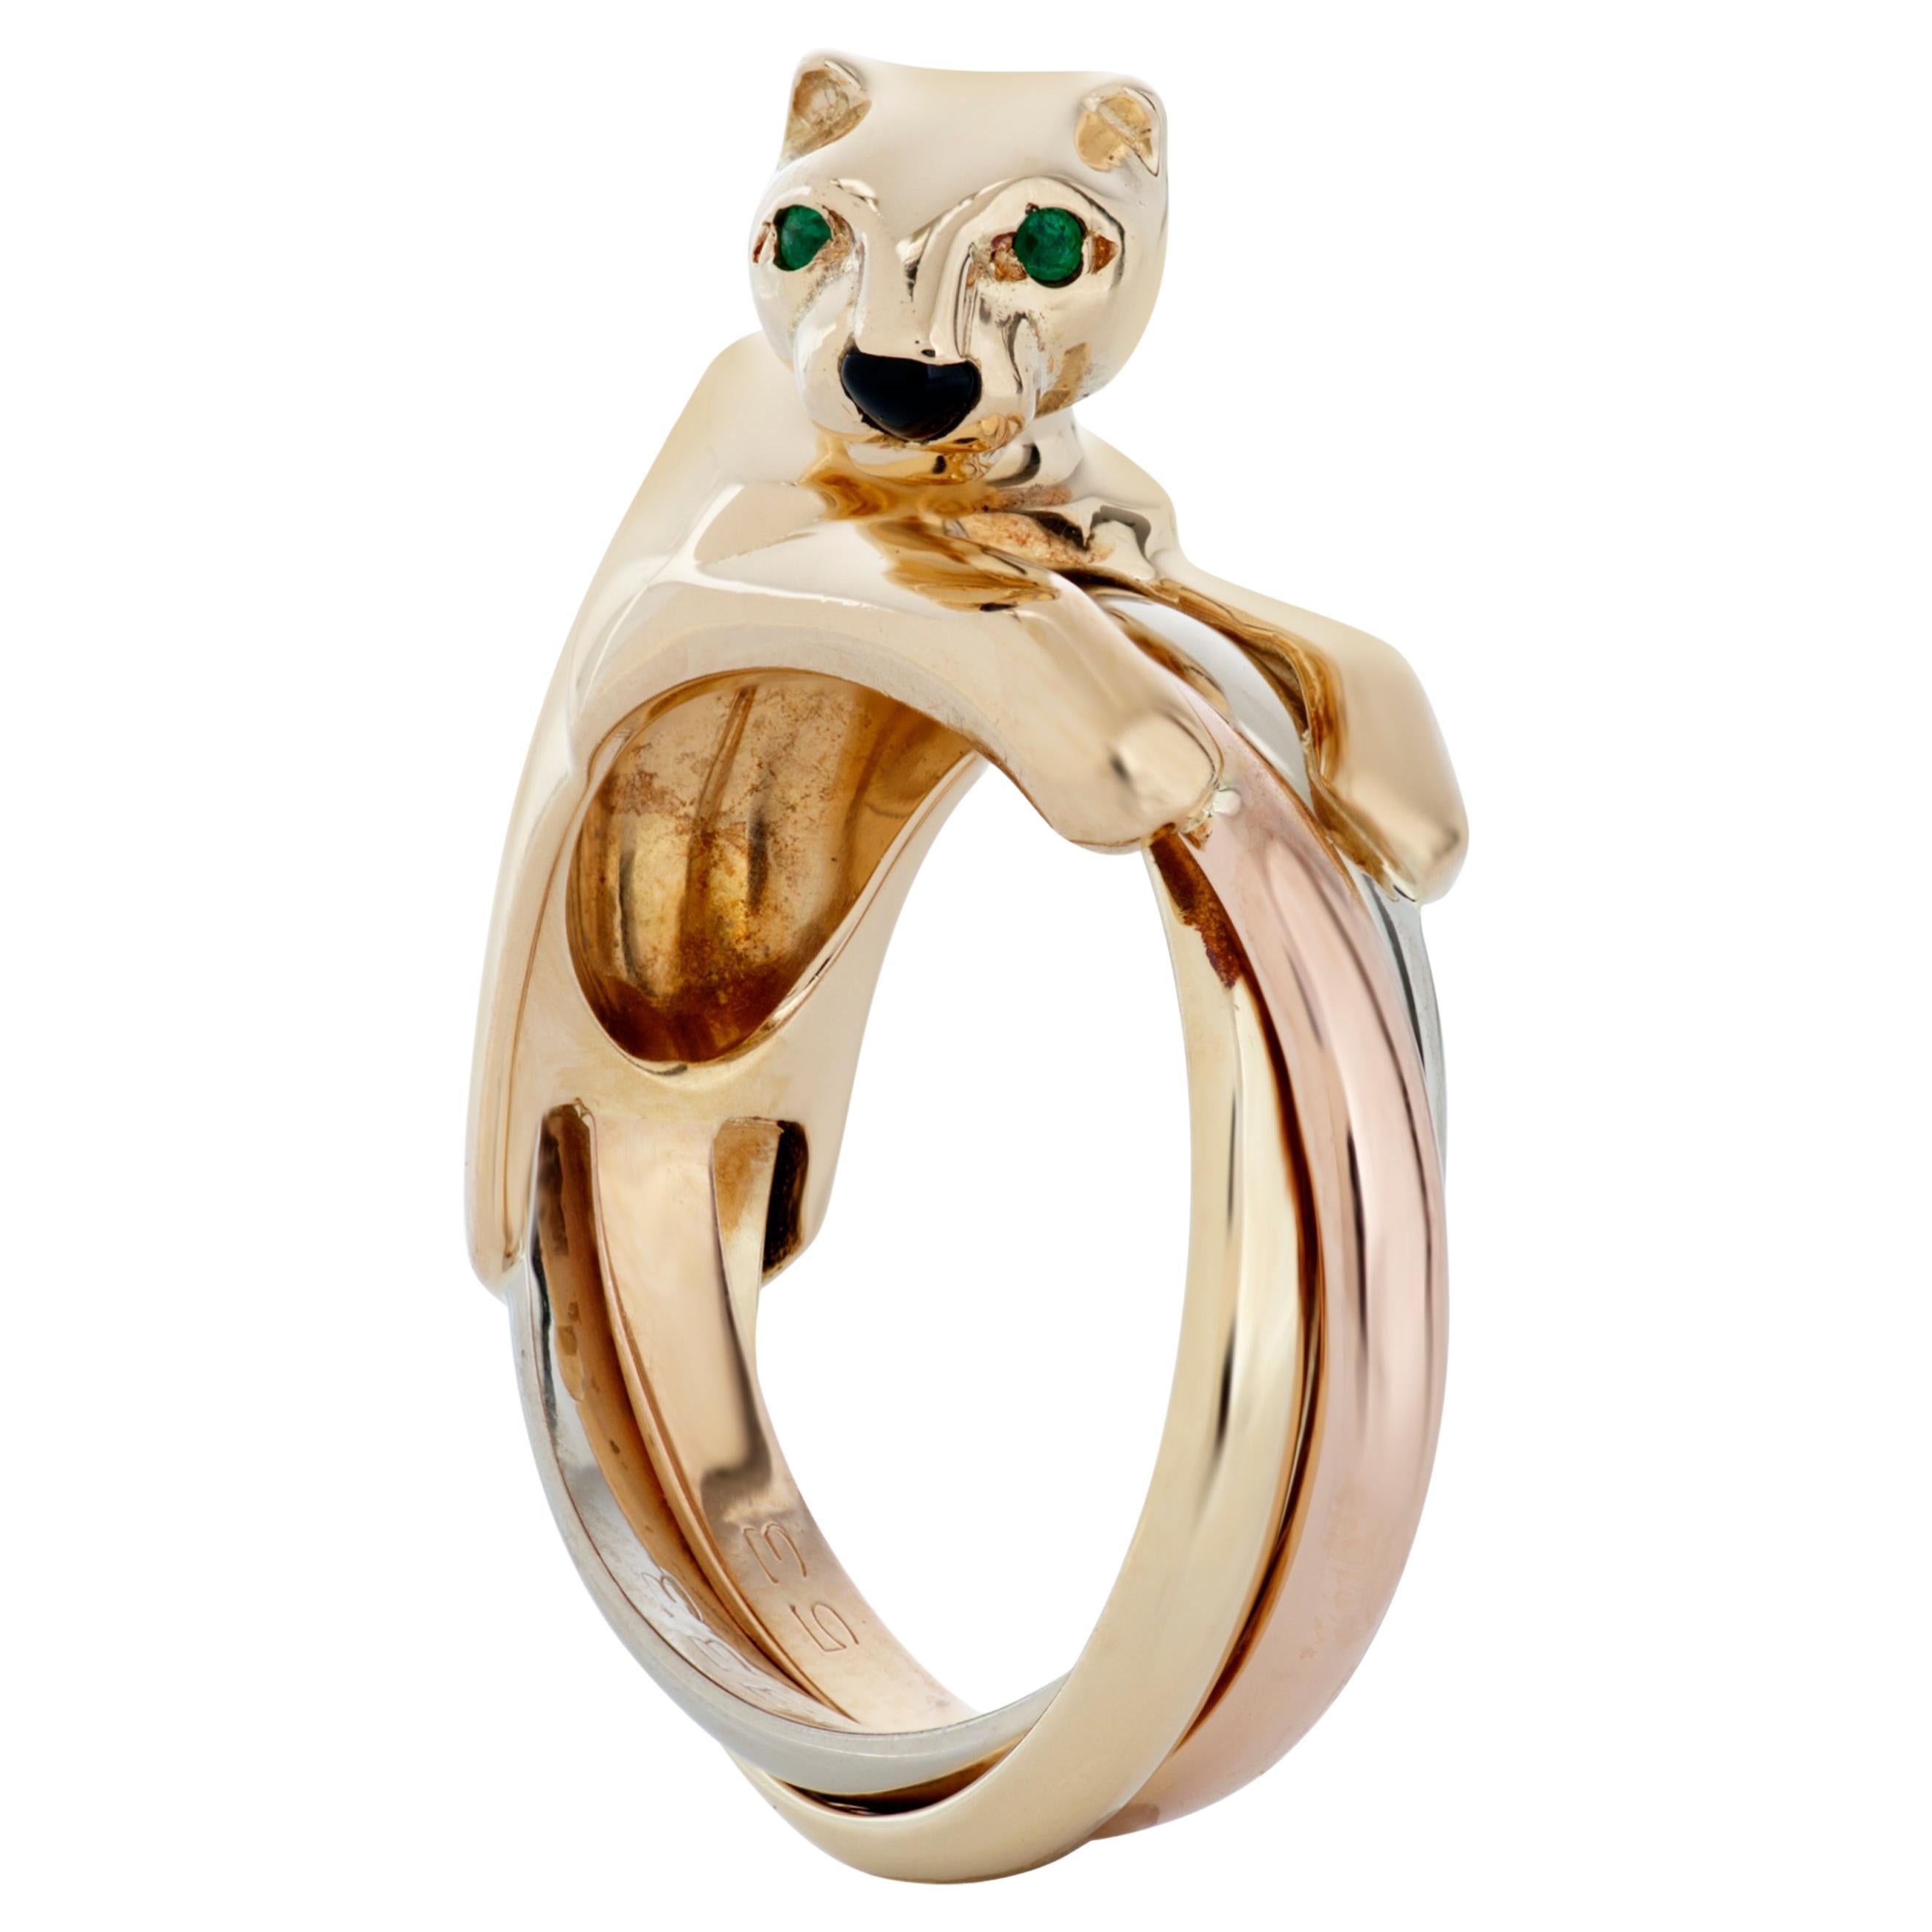 Vintage Cartier Emerald and Onyx Panther Trinity Ring in 18K Yellow Gold For Sale